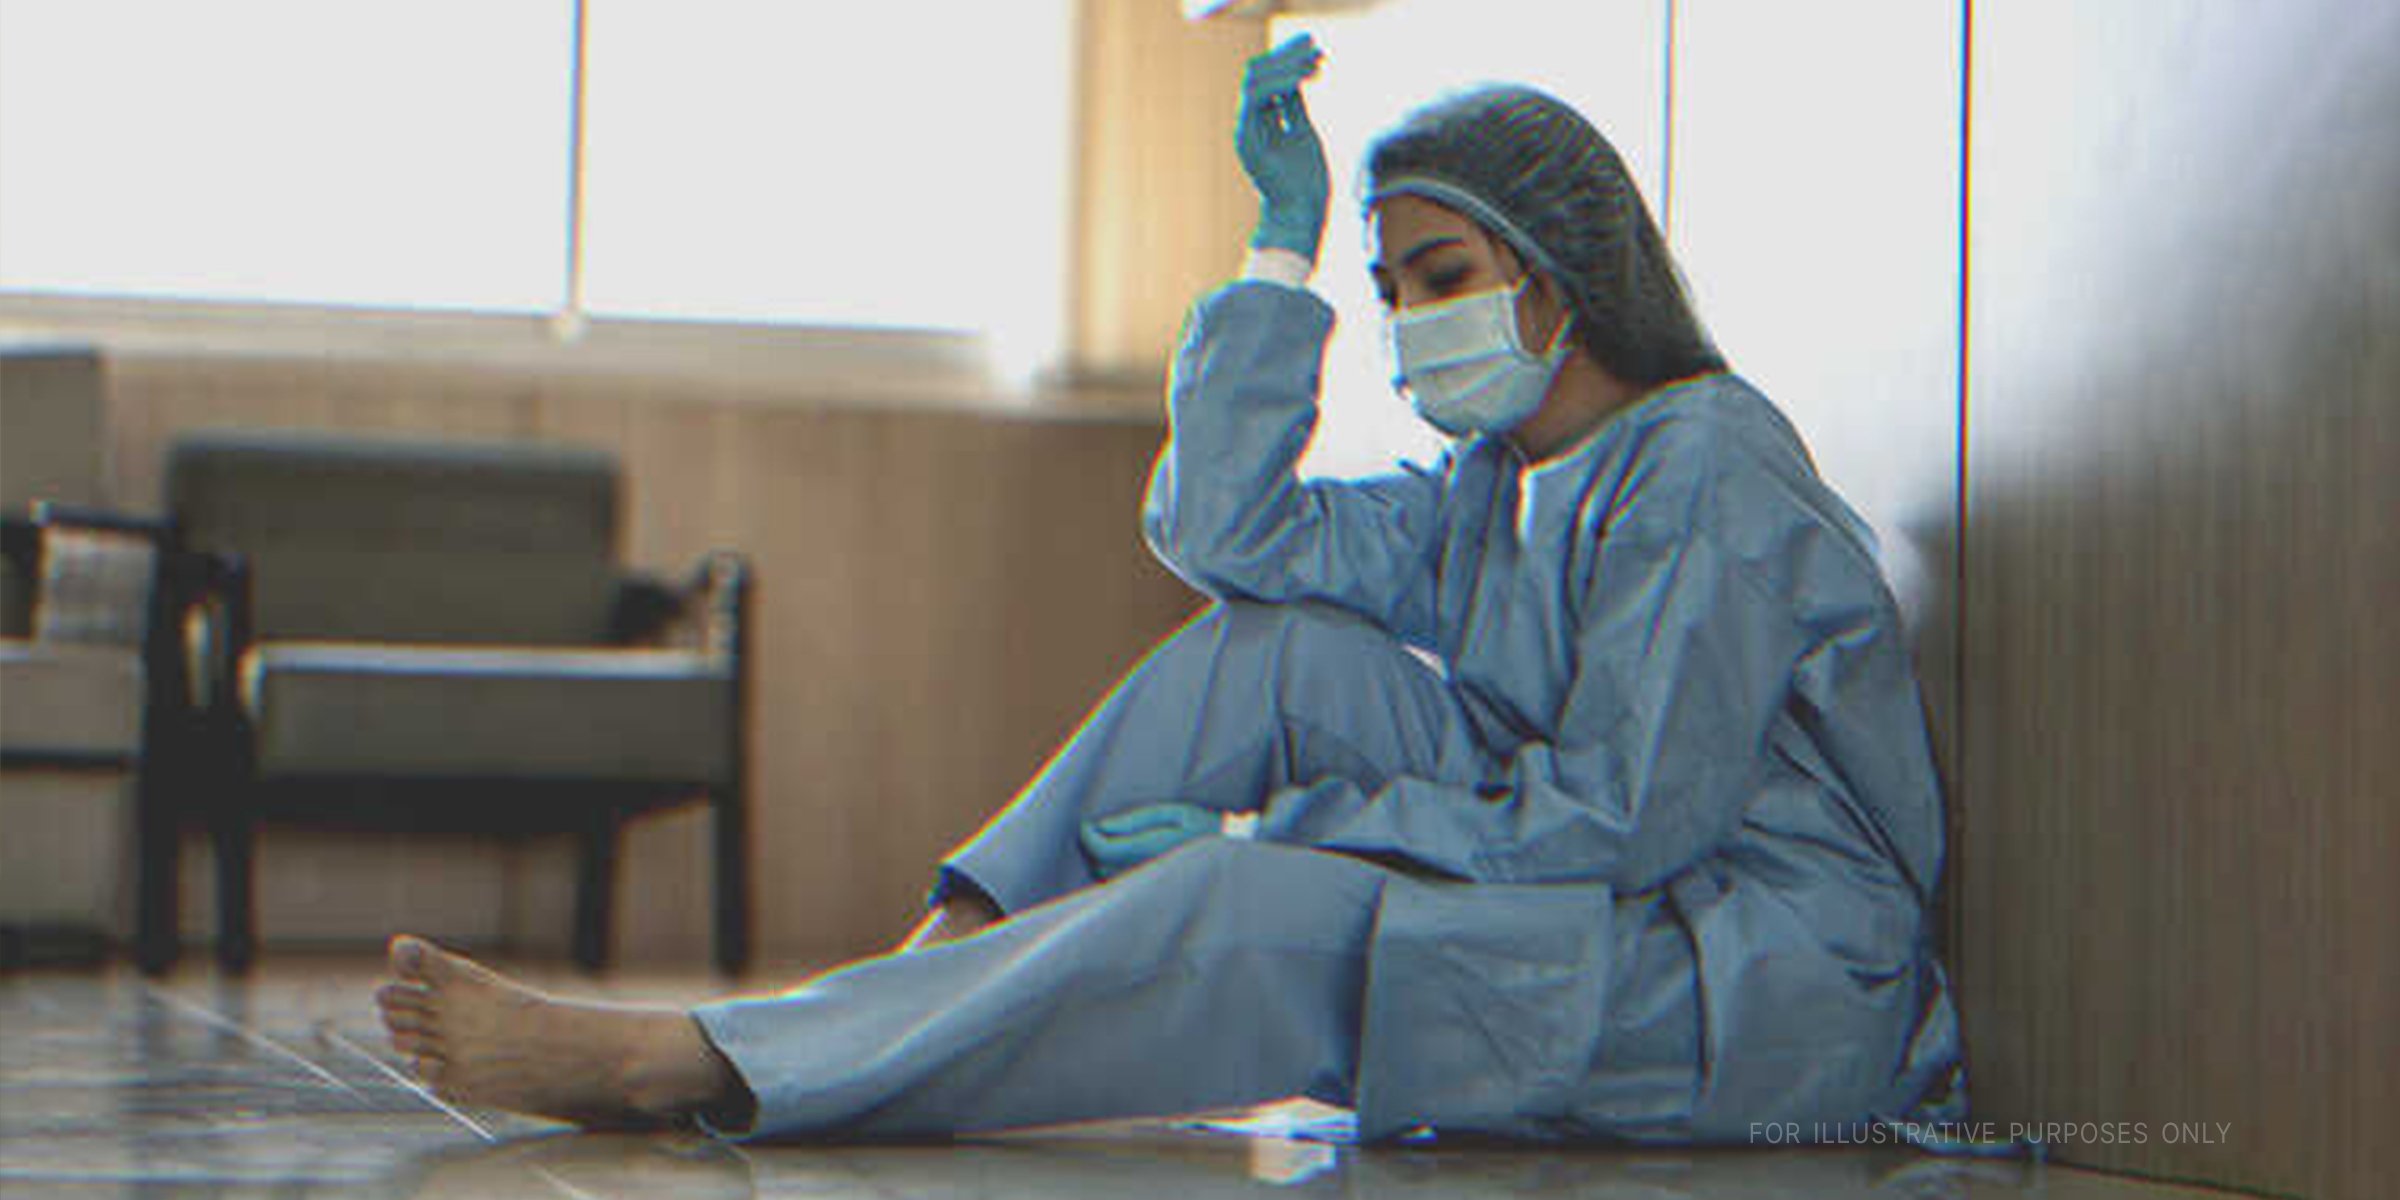 Surgeon Is Devastated After Losing Her Son. | Source: Shuttertsock